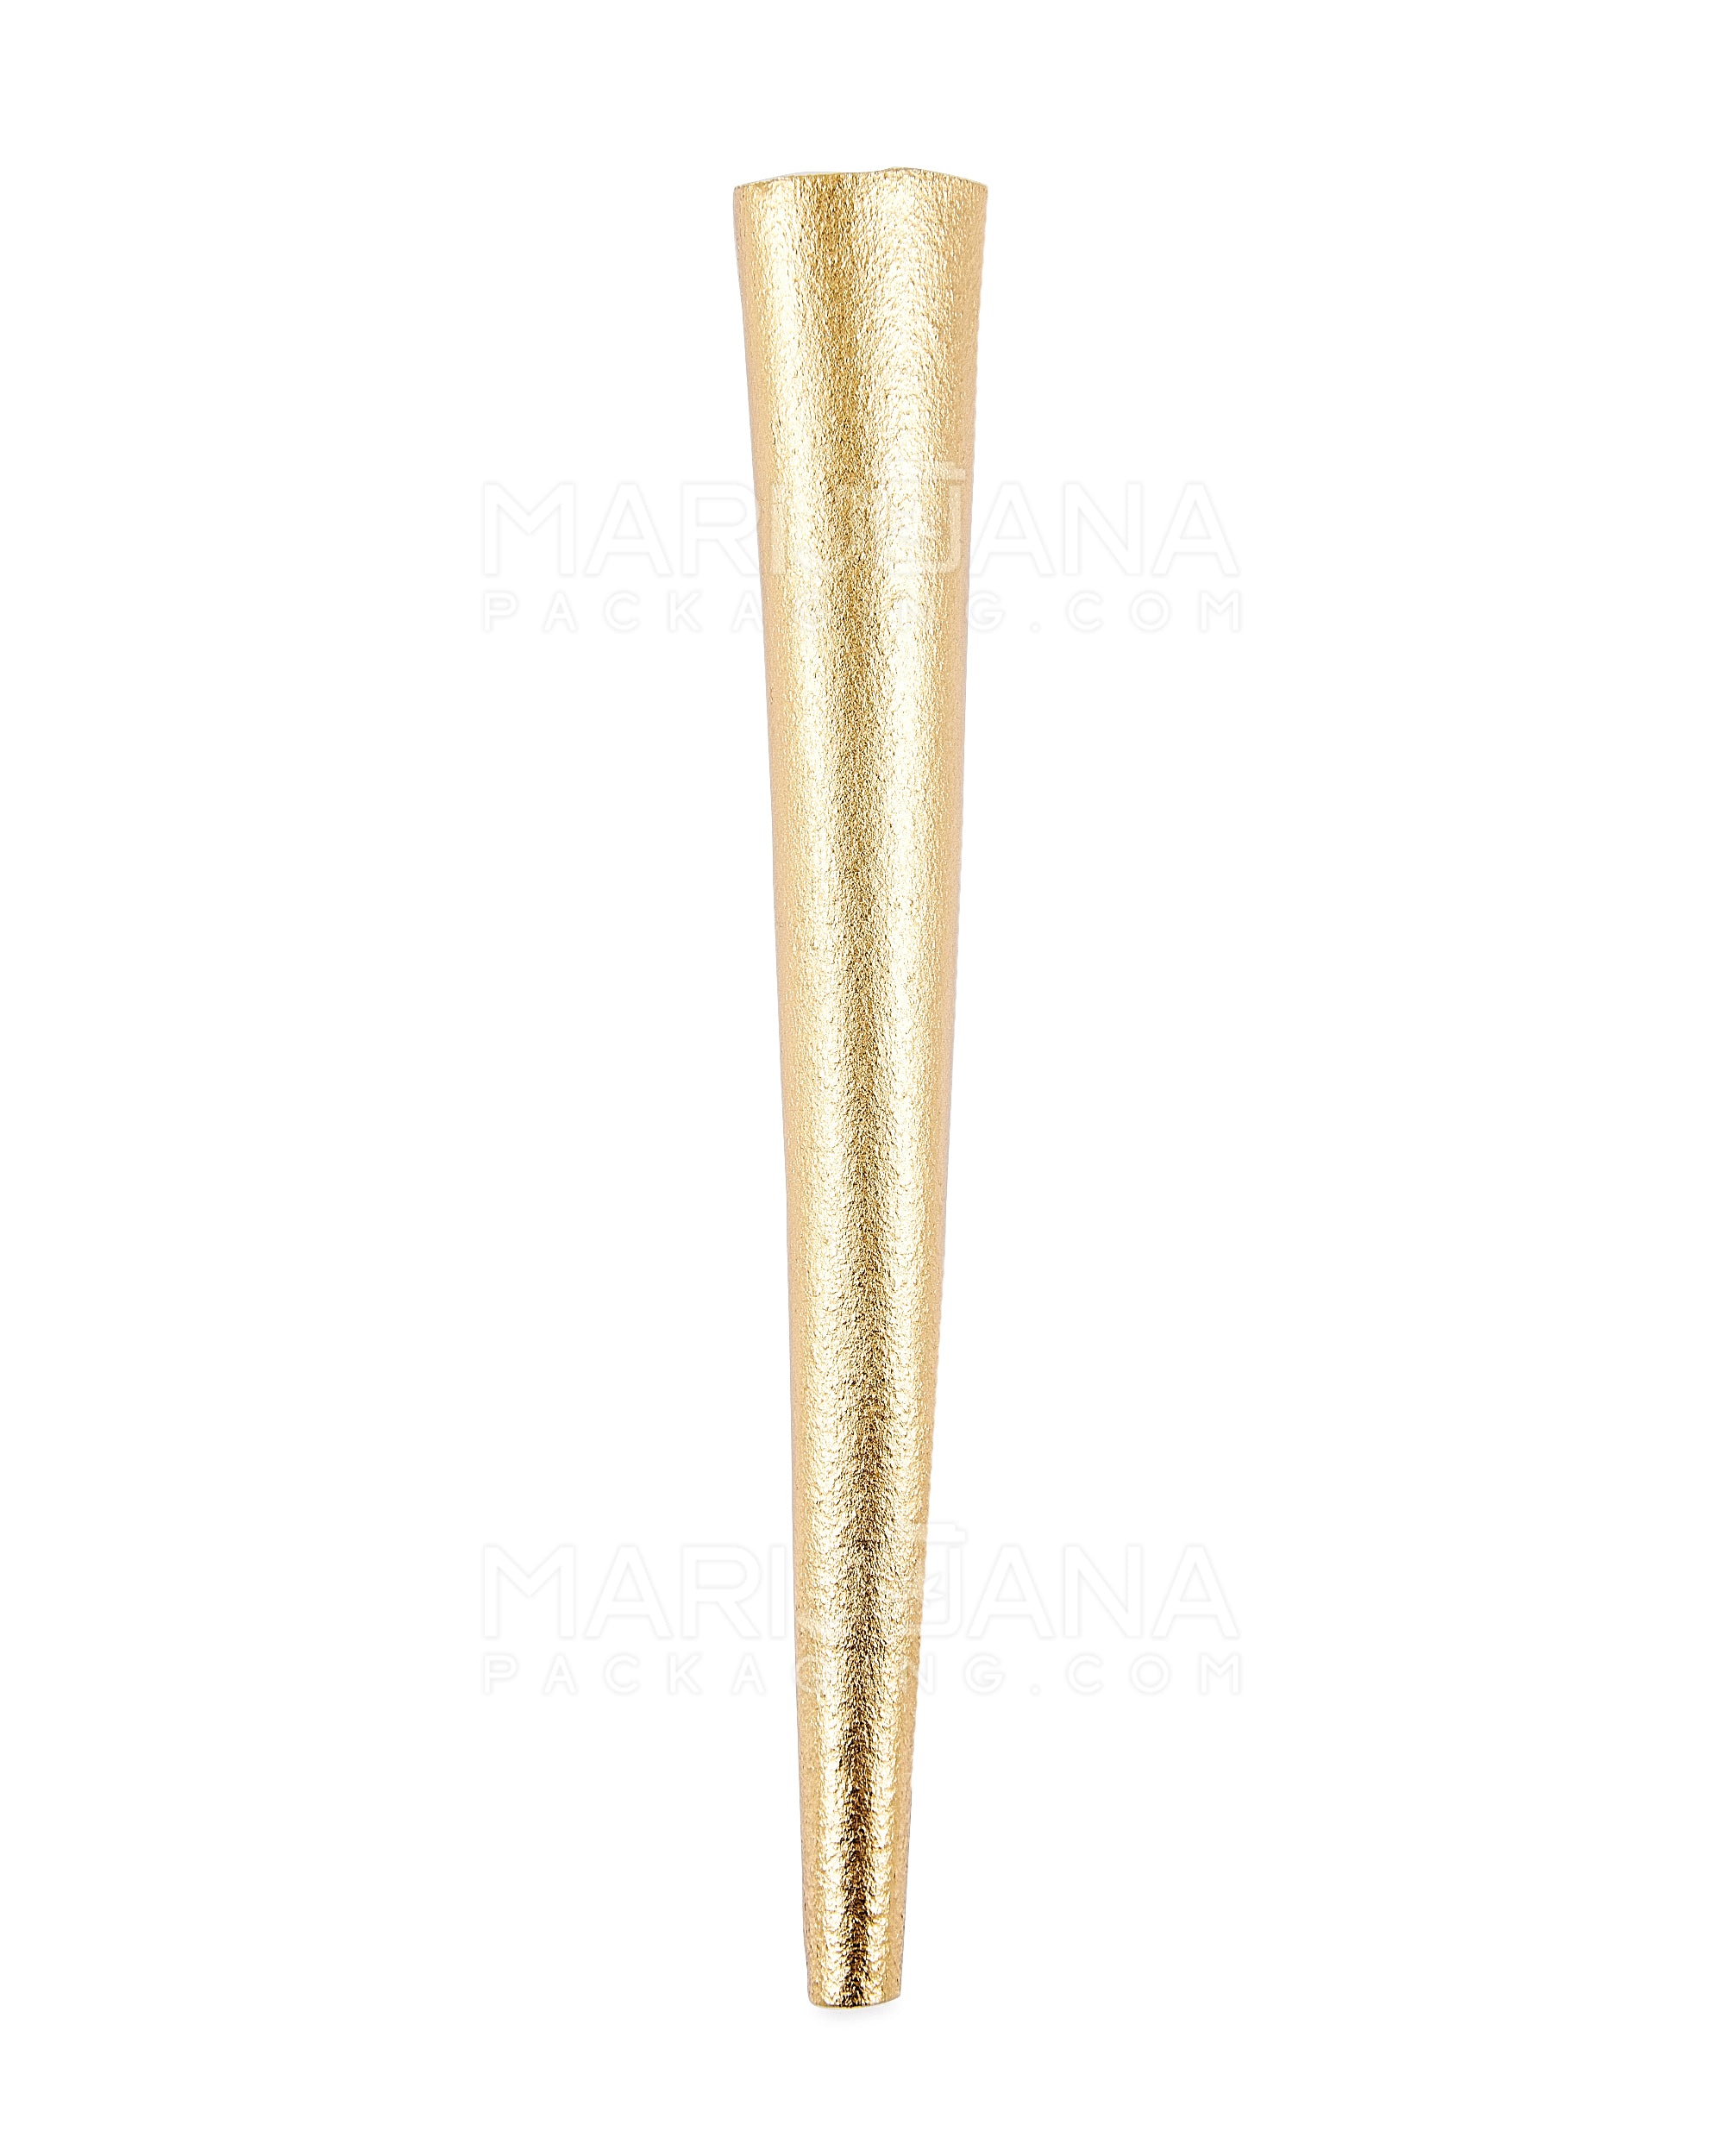 KUSH | 'Retail Display' 24K Gold King Size Hemp Pre Rolled Cones | 63mm - Edible Gold - 8 Count - 3